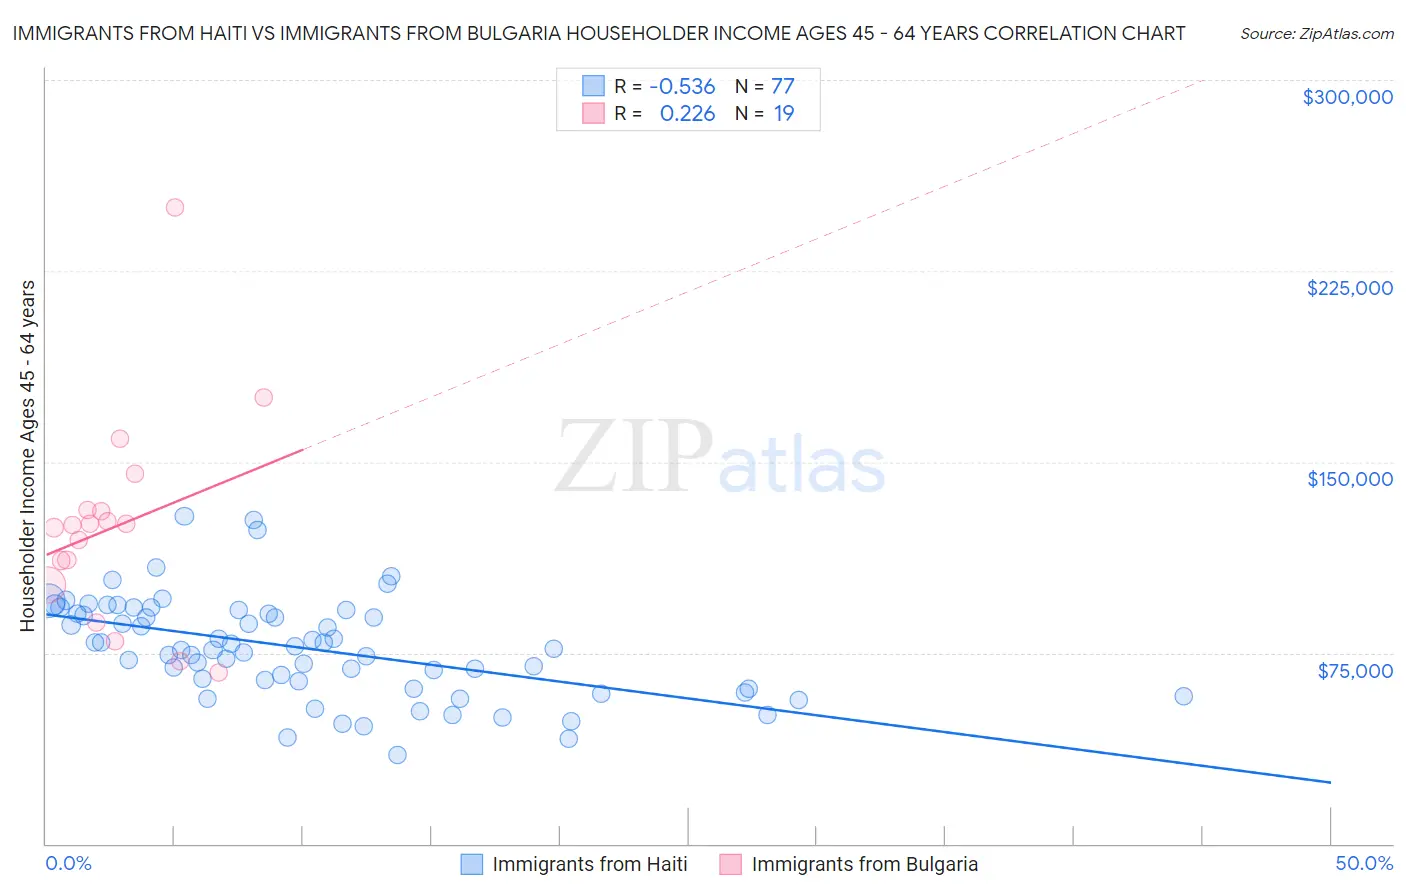 Immigrants from Haiti vs Immigrants from Bulgaria Householder Income Ages 45 - 64 years